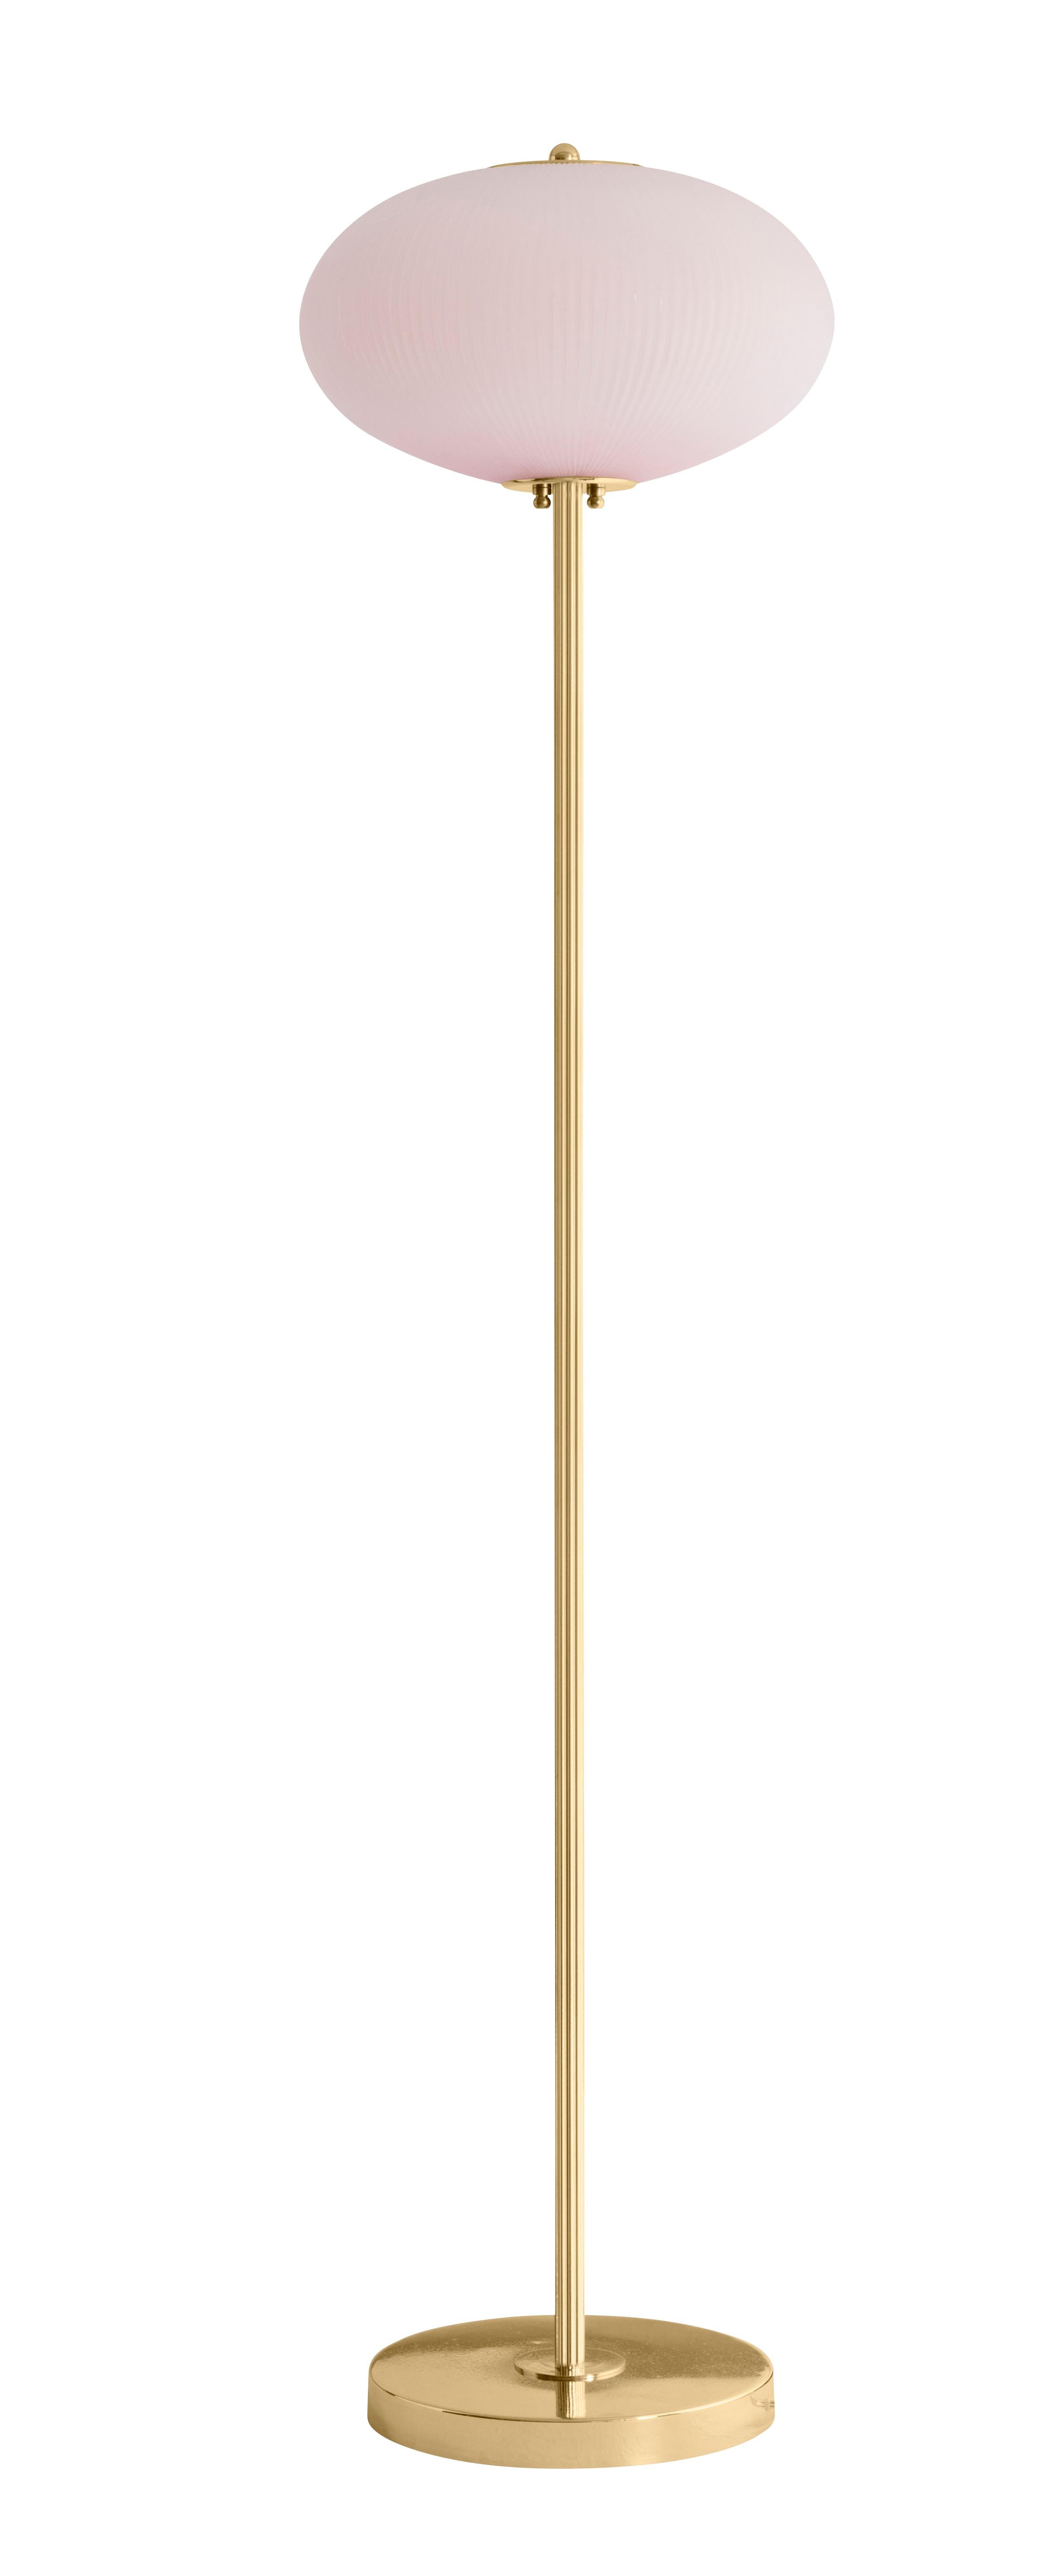 Floor lamp China 07 by Magic Circus Editions
Dimensions: H 150 x W 32 x D 32 cm, also available in H 140, 160
Materials: Brass, mouth blown glass sculpted with a diamond saw
Colour: soft rose

Available finishes: Brass, nickel
Available colours: